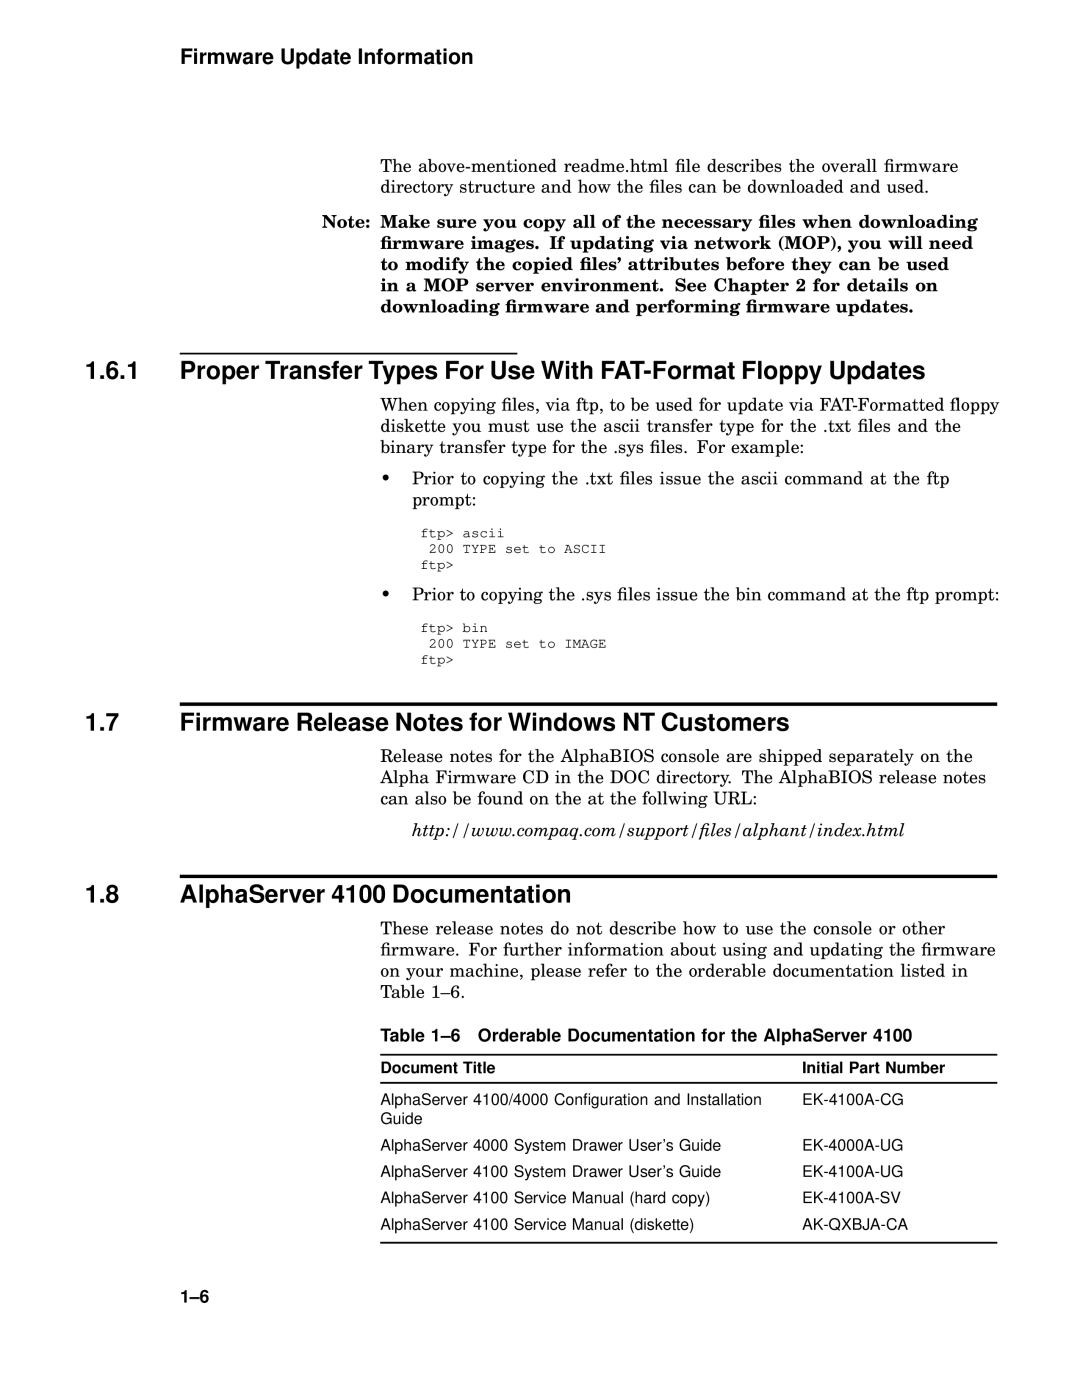 Compaq manual Firmware Release Notes for Windows NT Customers, AlphaServer 4100 Documentation 